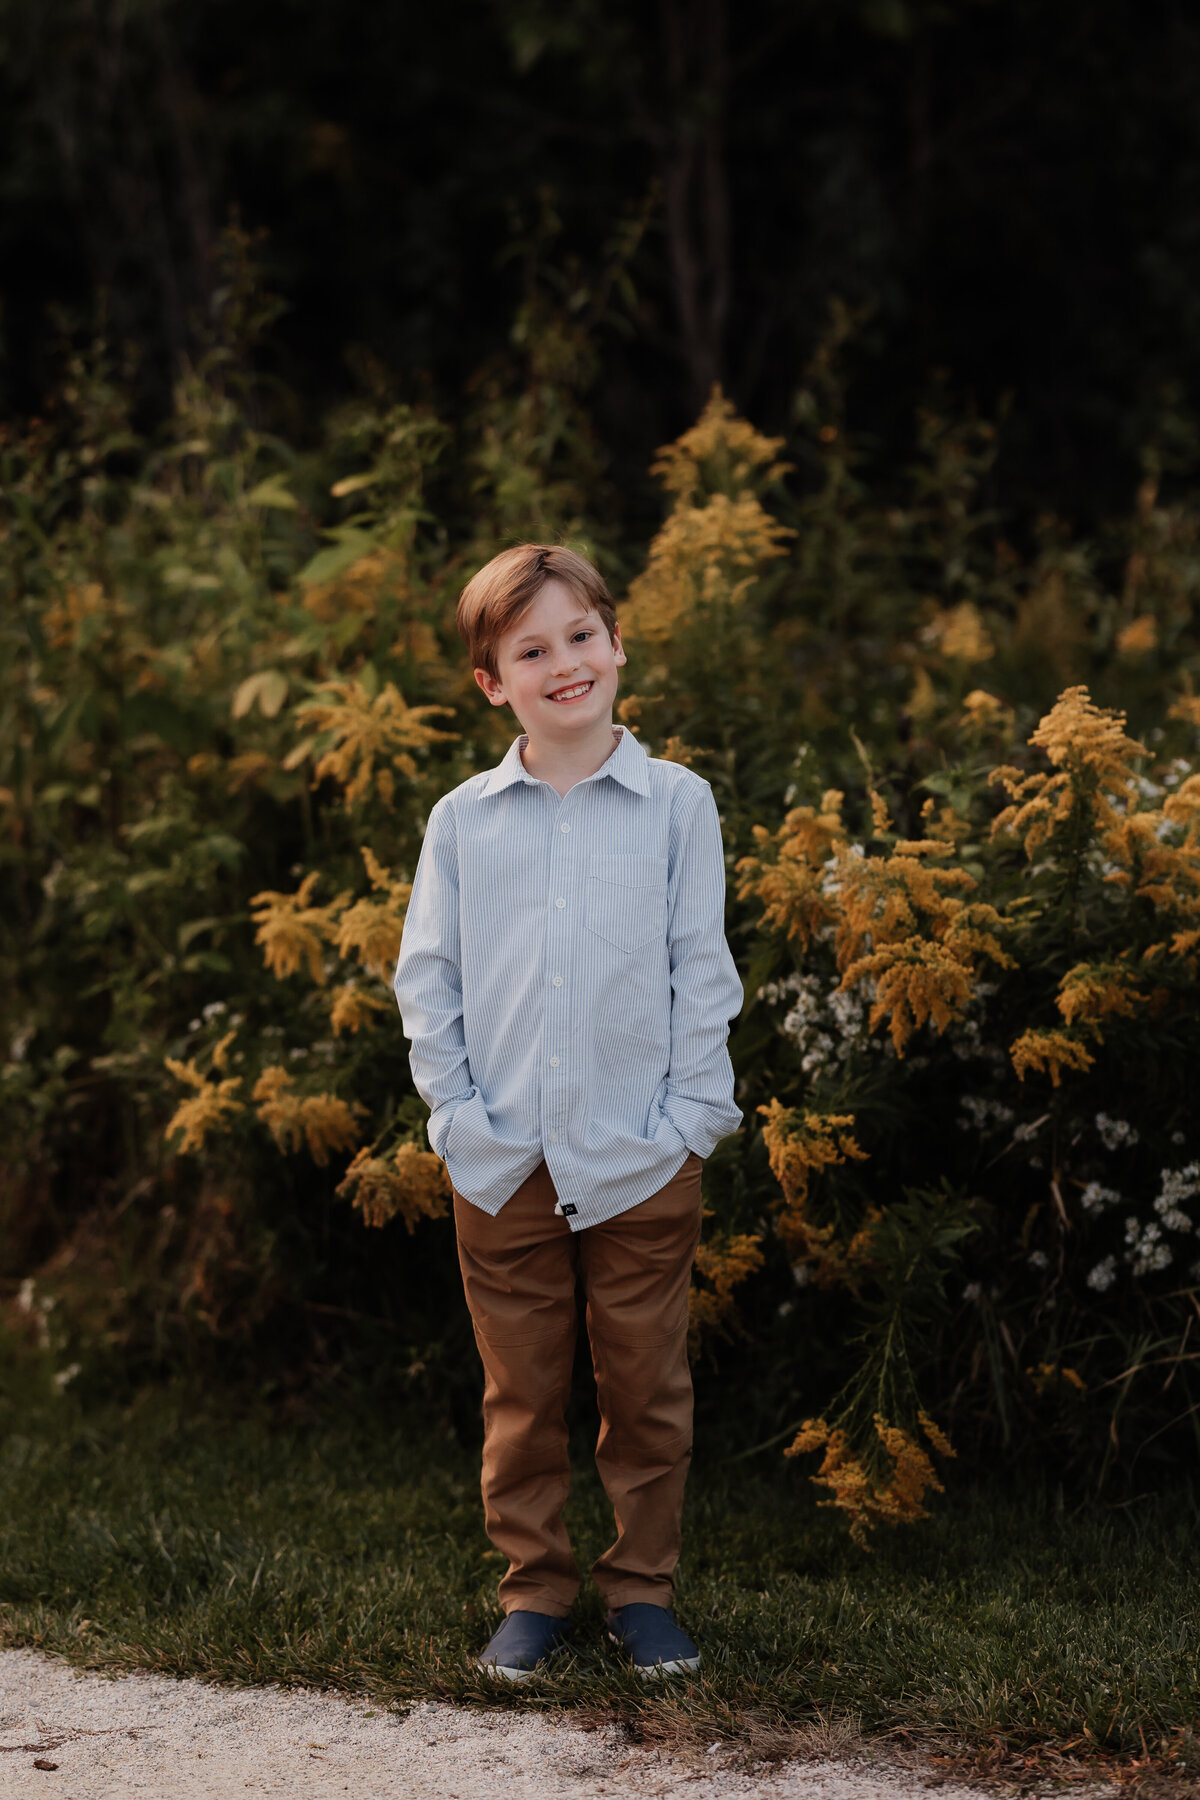 A boy smiles with his hands in his pockets in front of yellow flowers.